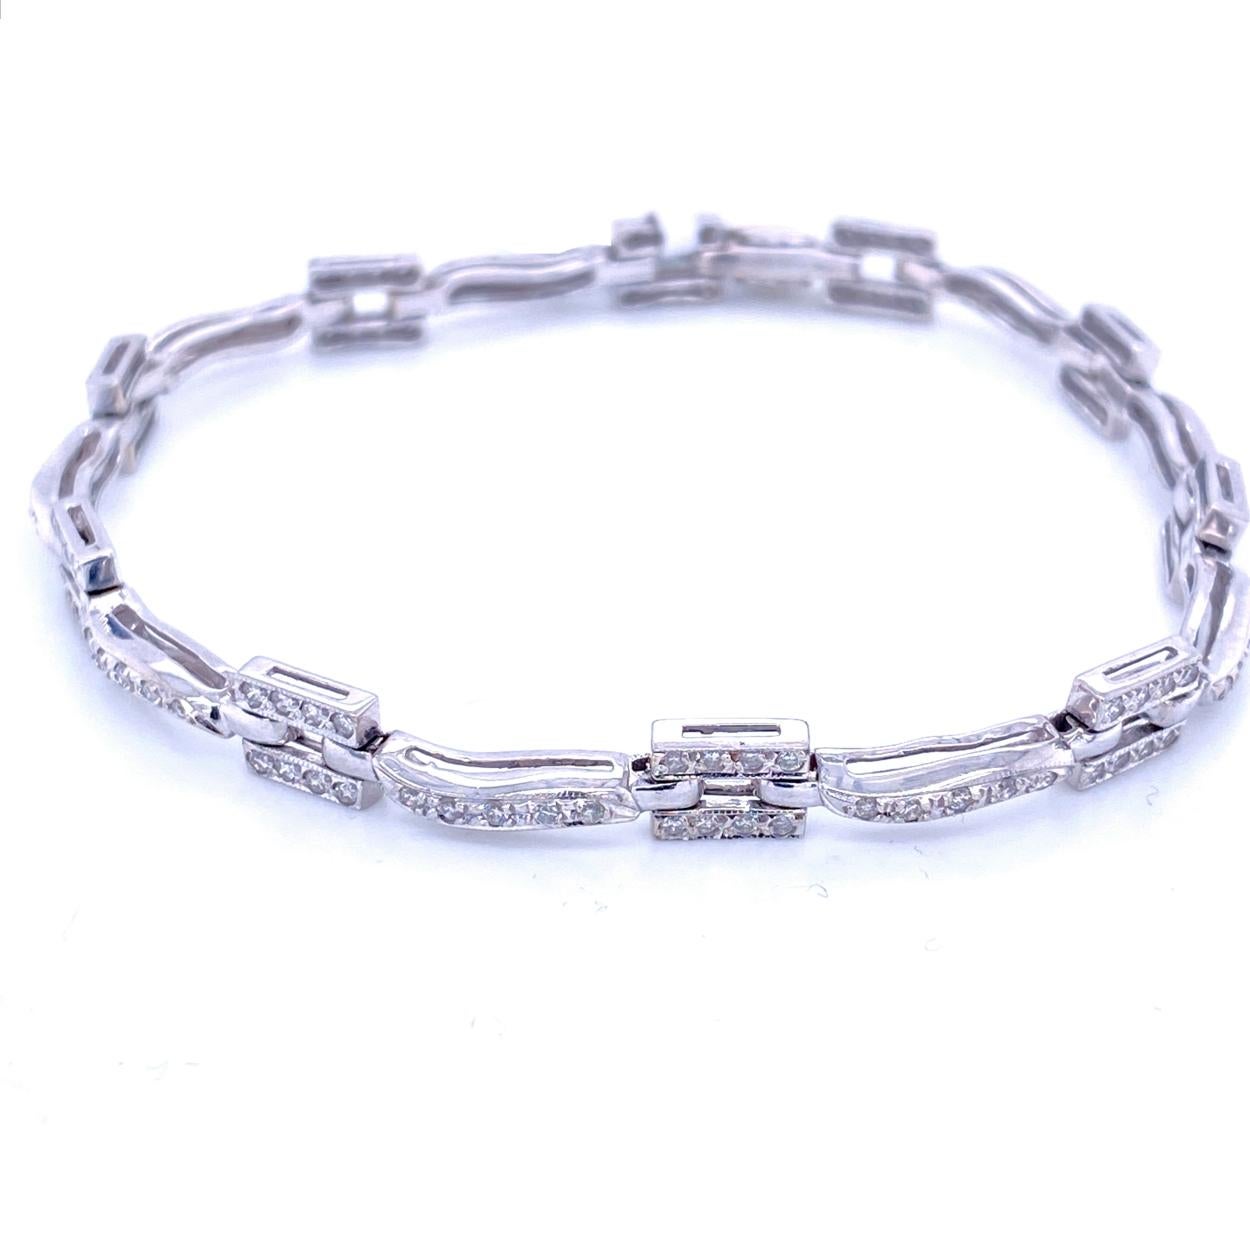 This Diamond Bracelet consists of 9 bar and 10 rectangular Links with Milgrained Edge Pave Set with 125 pieces of 1.1 mm Round Brilliant diamonds in 14K Gold.   The bracelet comes with a  Built-in safety lock to protect it from loss. 
Total Weight